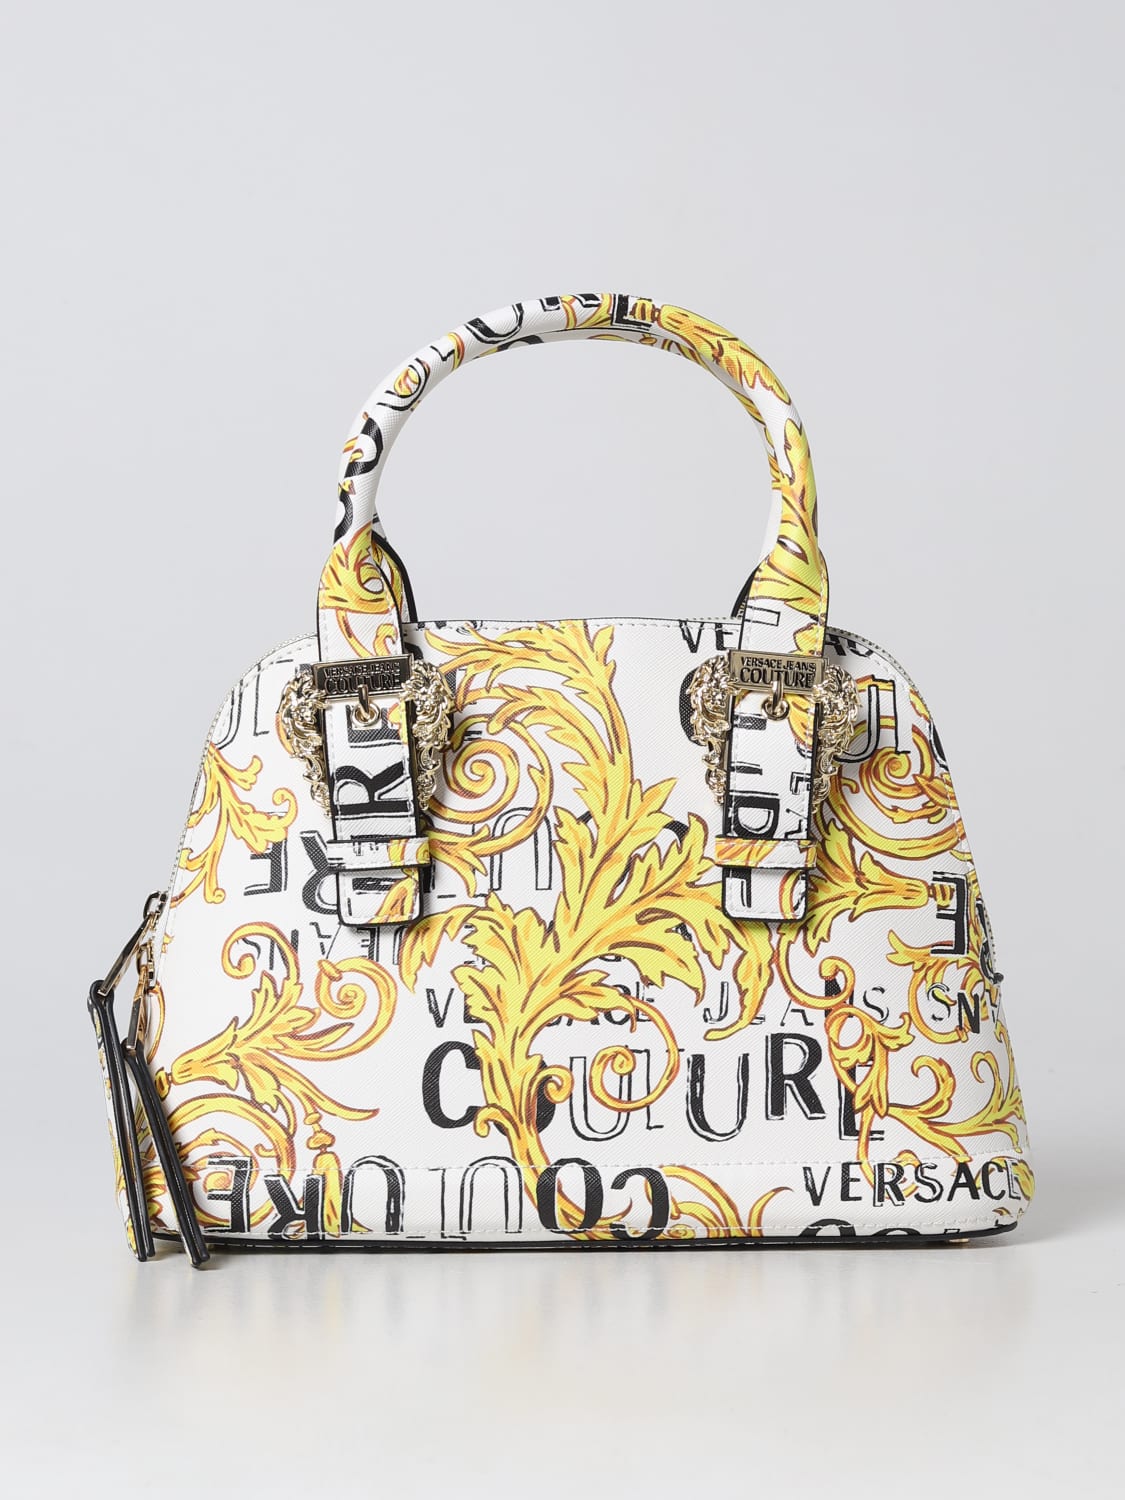 VERSACE JEANS COUTURE ハンドバッグ ホワイト